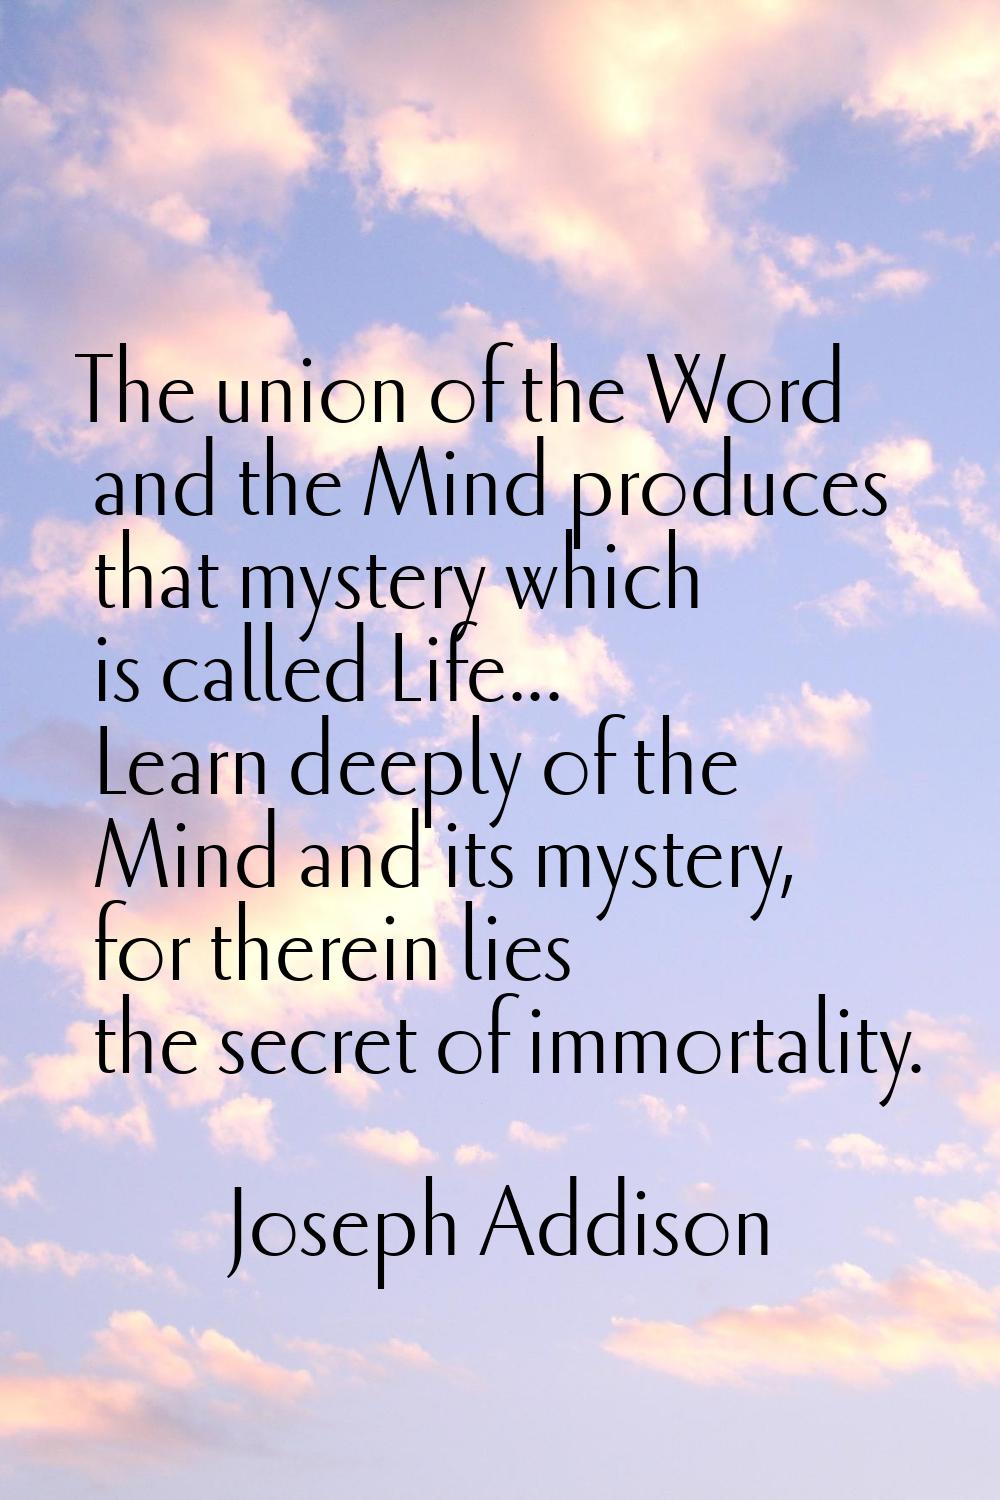 The union of the Word and the Mind produces that mystery which is called Life... Learn deeply of th